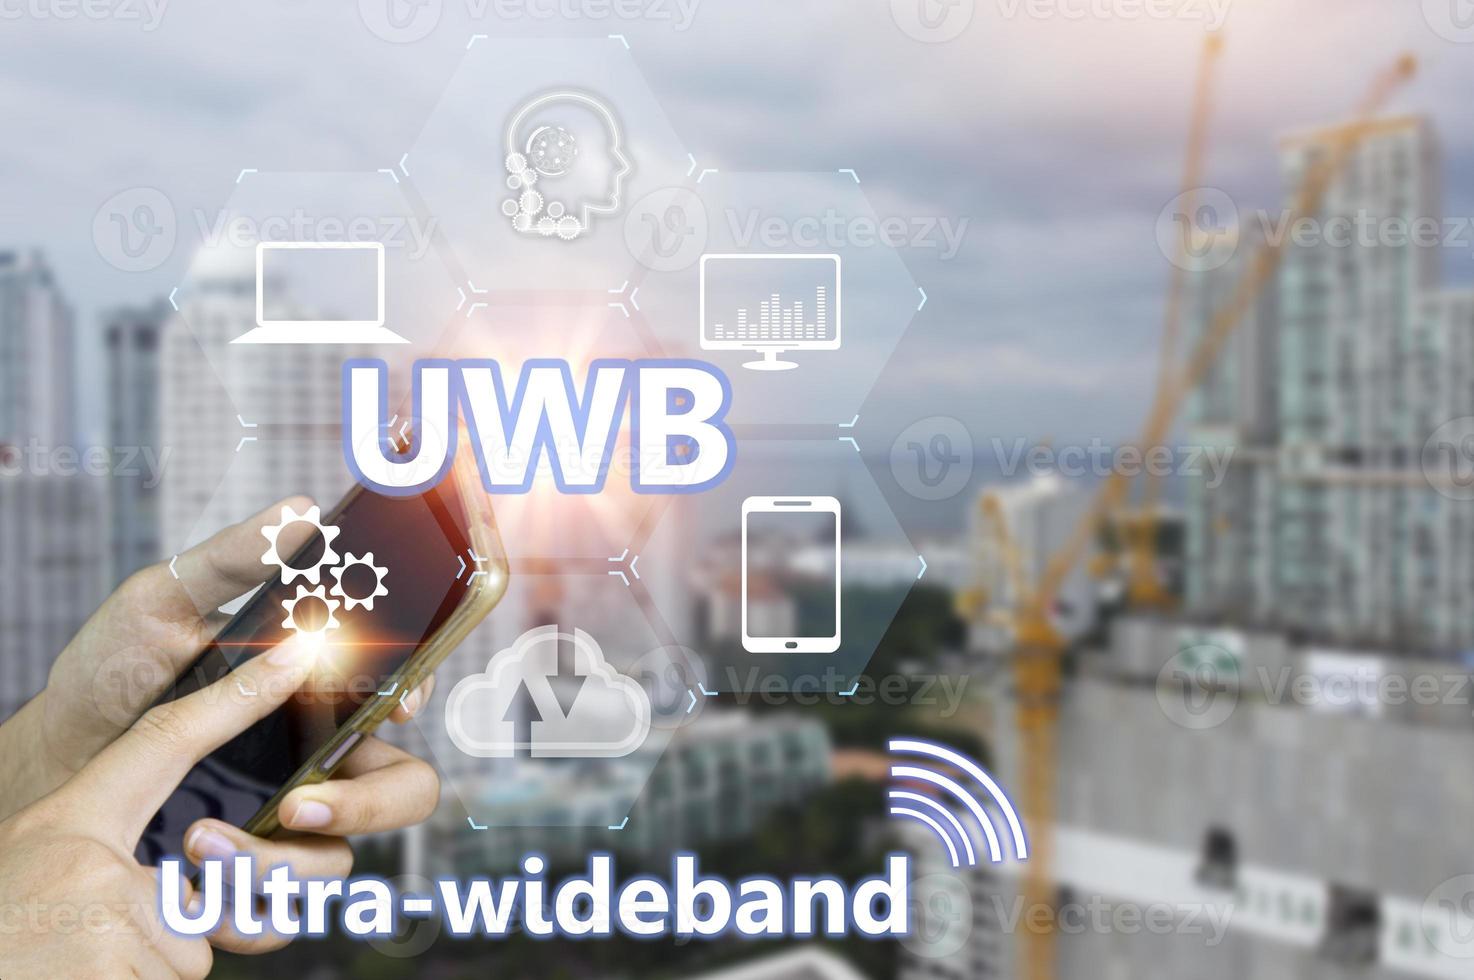 Ultra-wideband UWB is a short-range radio communication technology on bandwidths of 500MHz or greater and at very high frequencies. Overall, it works similarly to Bluetooth and Wi-Fi photo